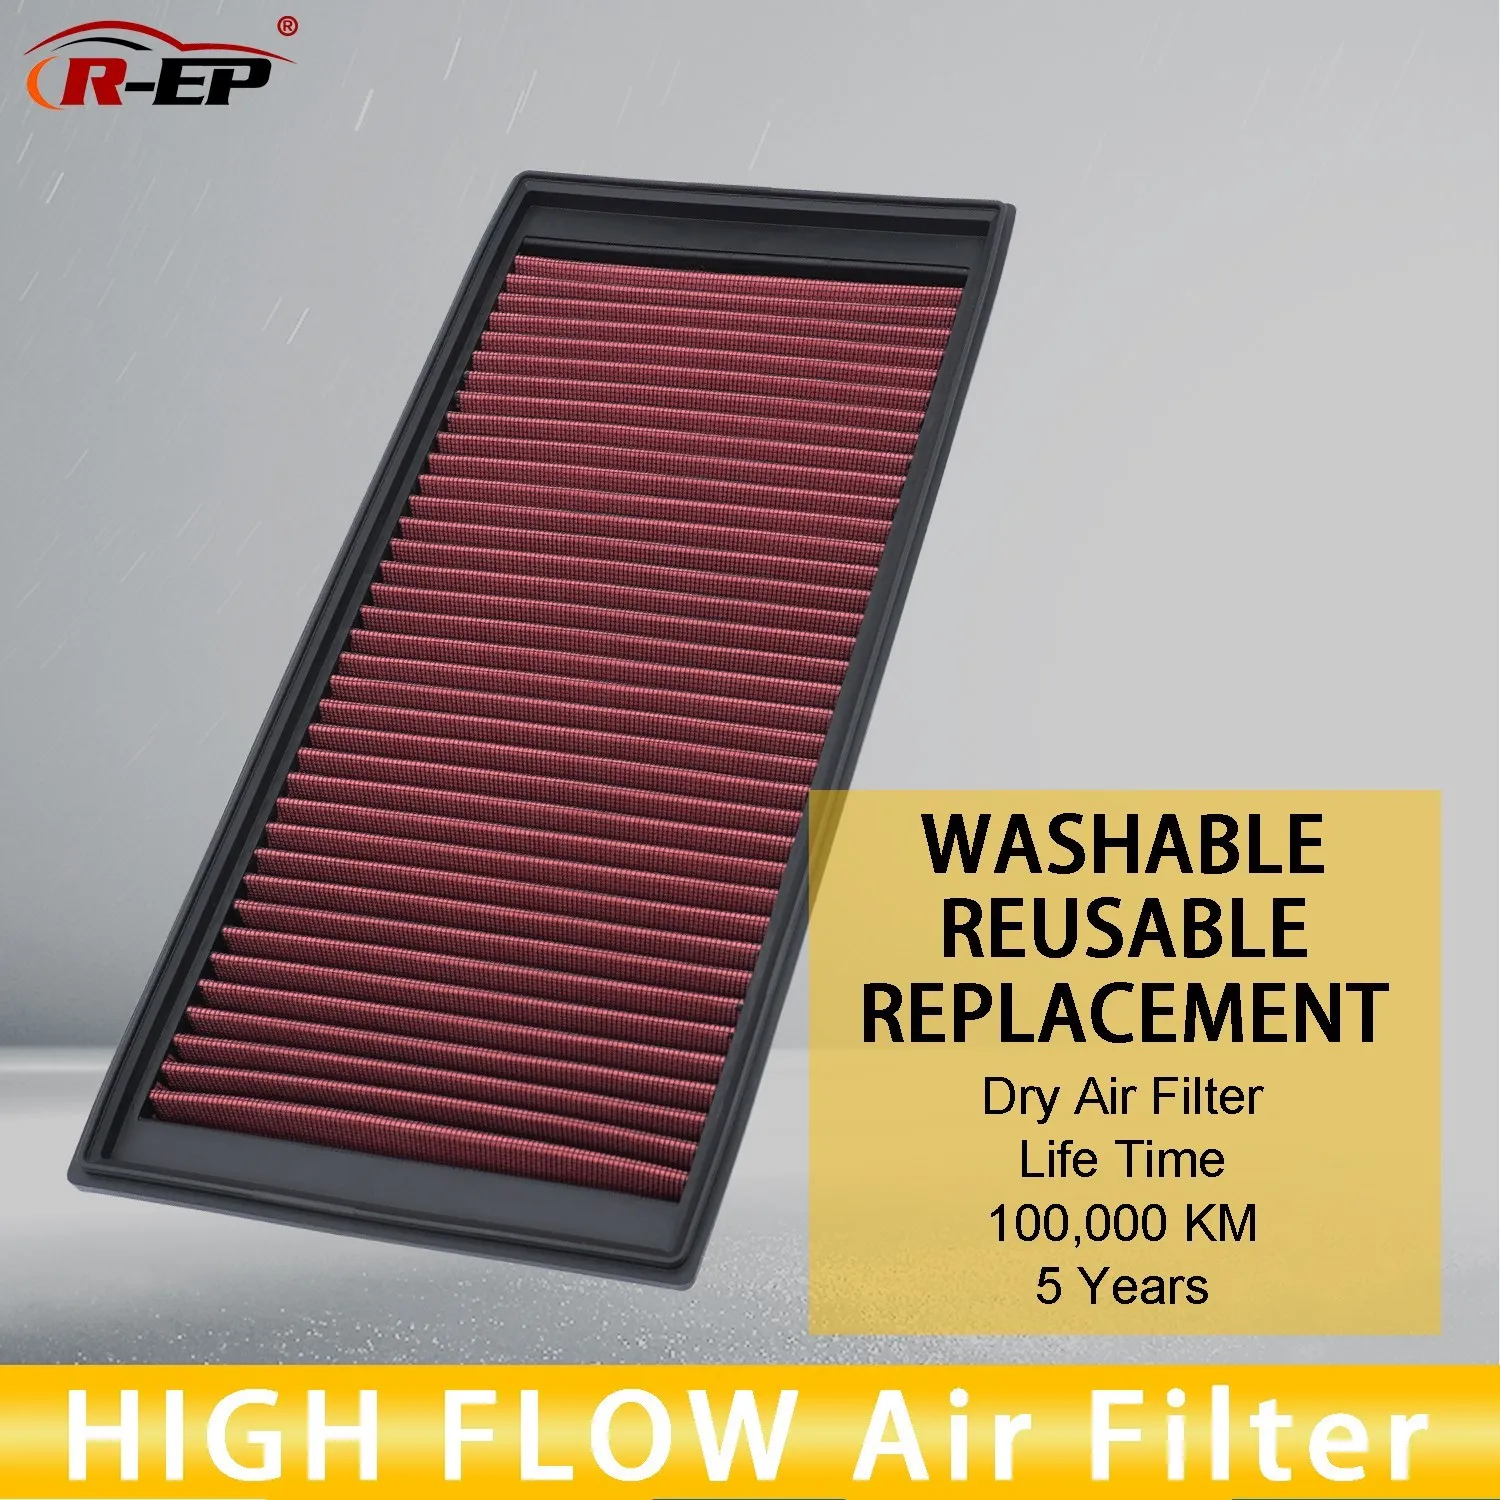 R-EP High Flow Air Filter Fits for VW Golf IV GTI Bora Beetle Jetta Seat Leon - £38.51 GBP